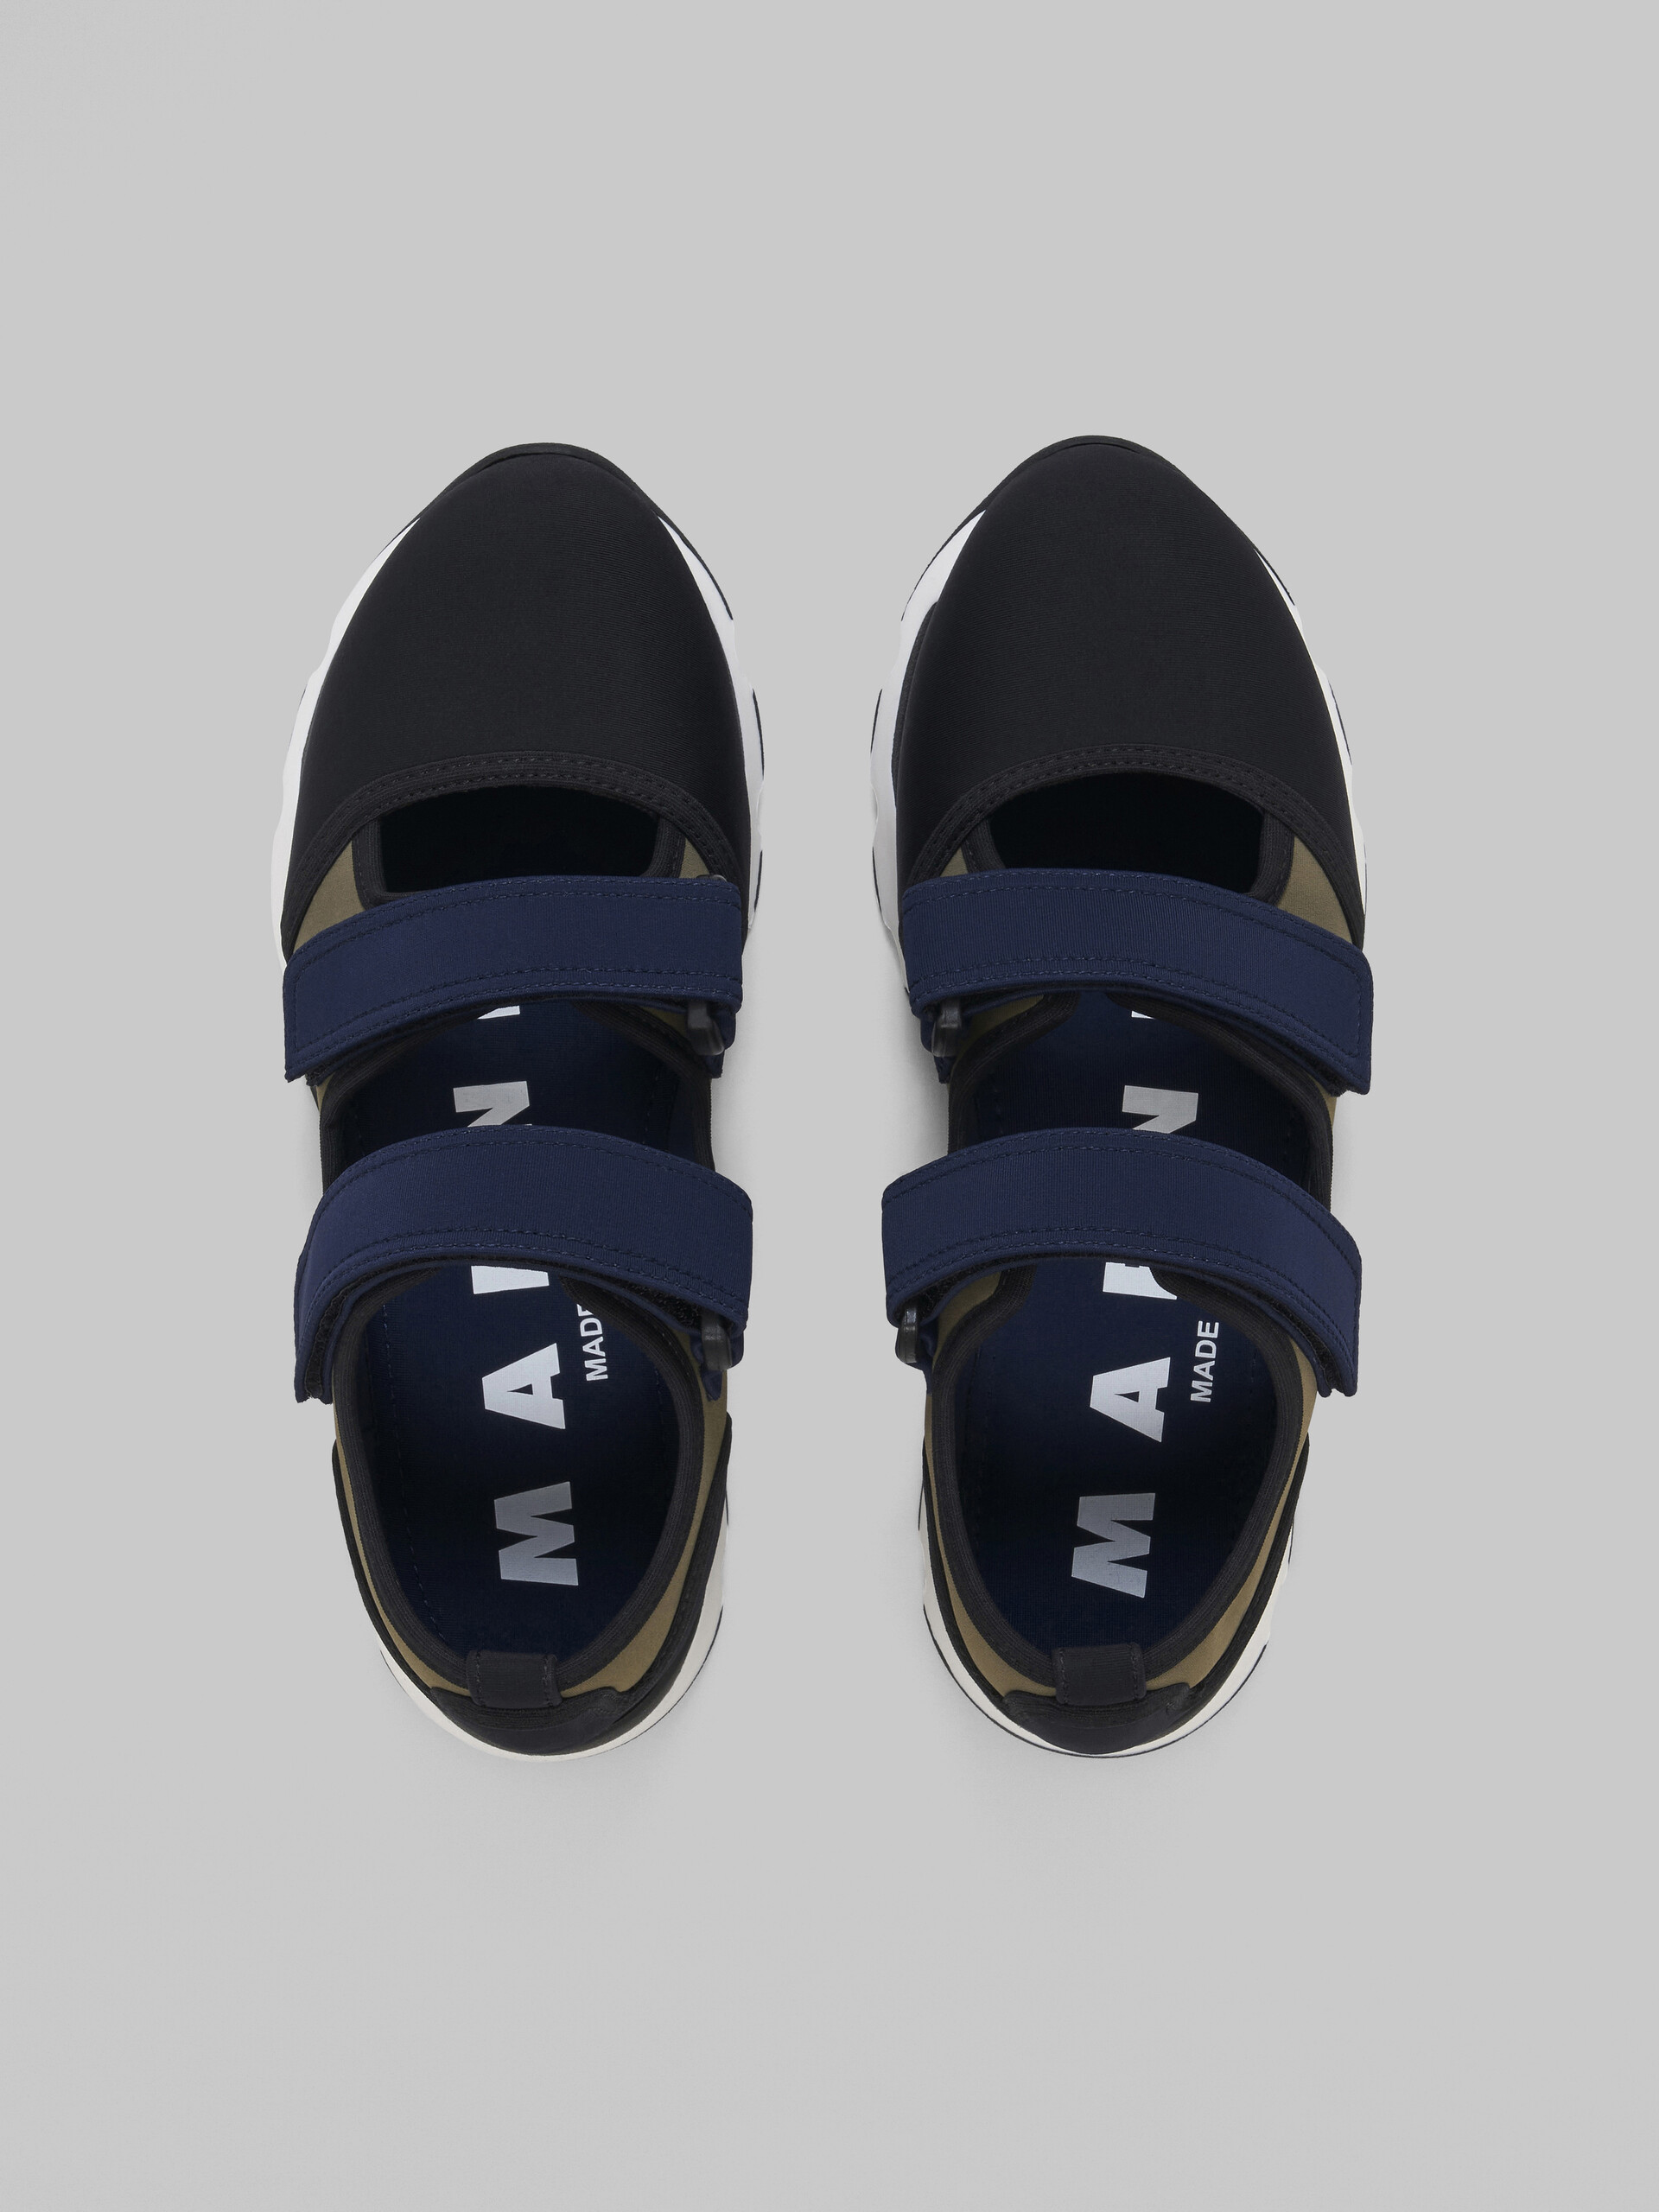 Black green and blue technical fabric sneaker with hook and loop fasteners - Sneakers - Image 4